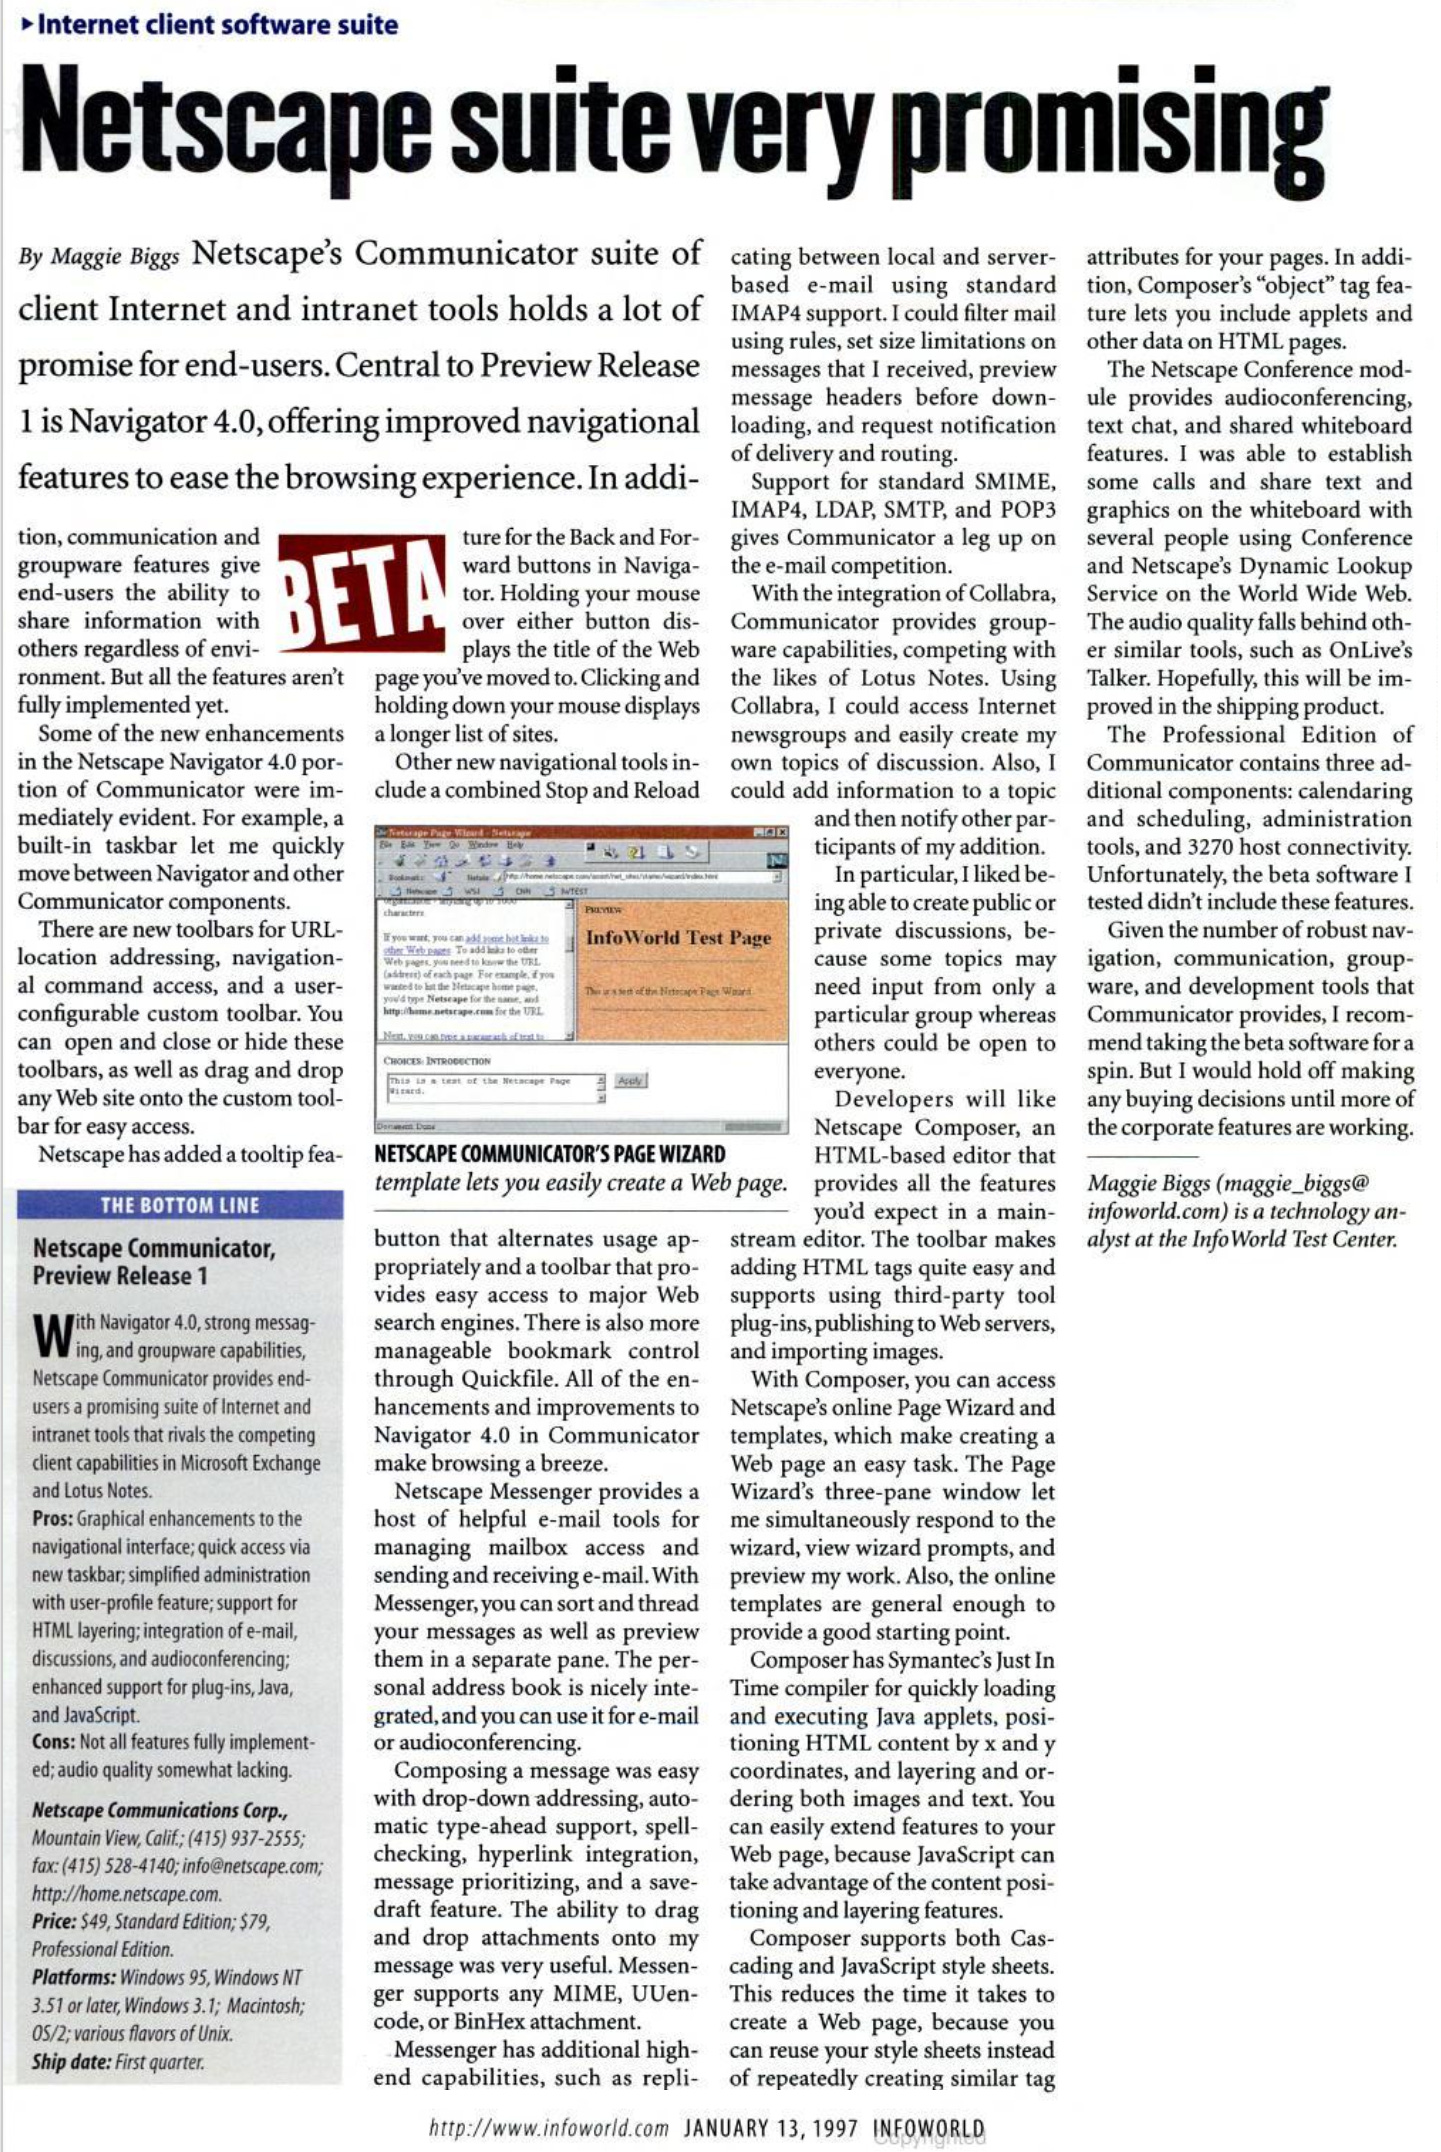 Scanned article "Netscape Suite very promising"